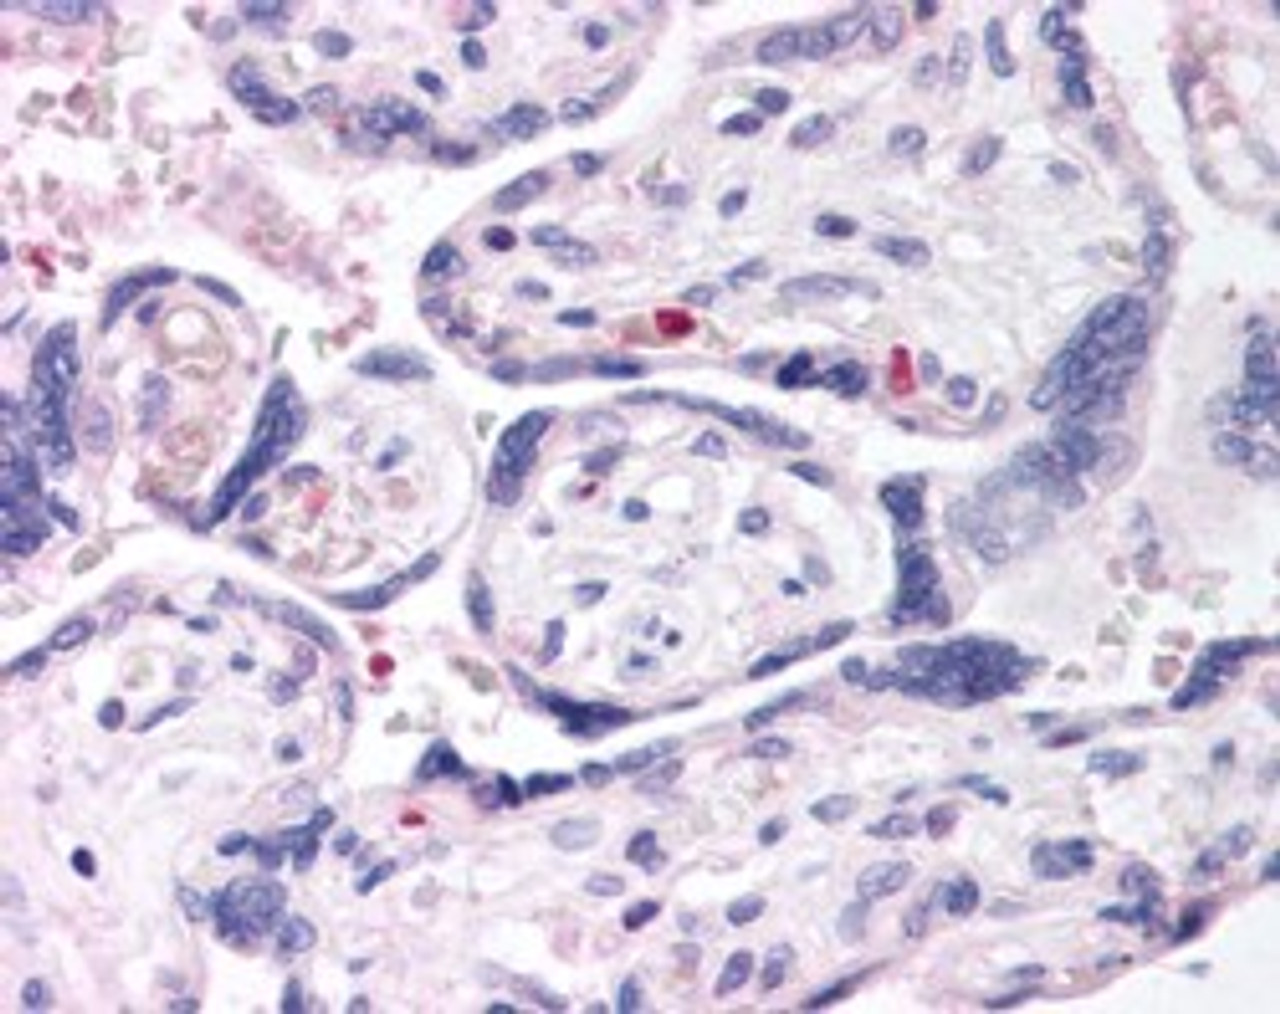 45-506 (2.5ug/ml) staining of paraffin embedded Human Placenta. Steamed antigen retrieval with citrate buffer pH 6, AP-staining.